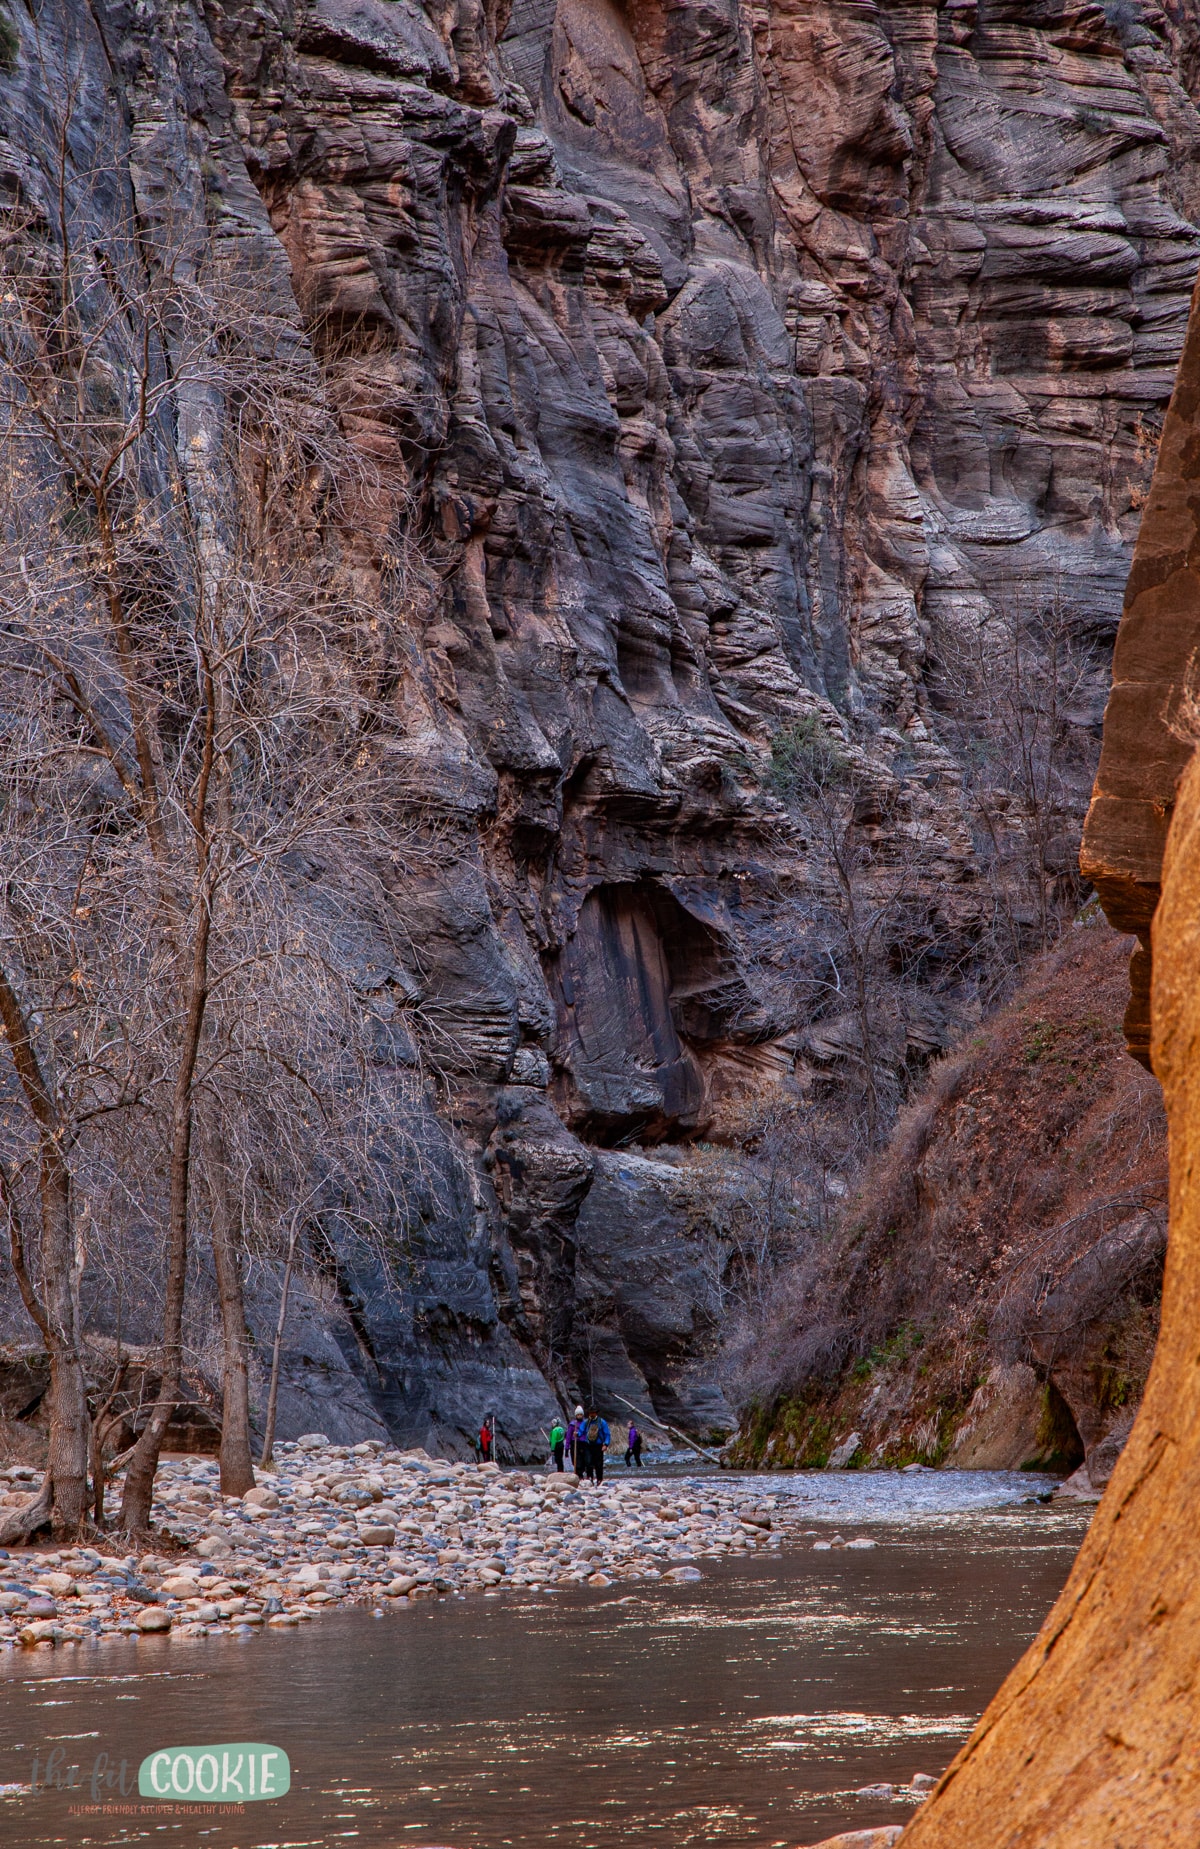 The beginning of The Narrows in Zion National Park